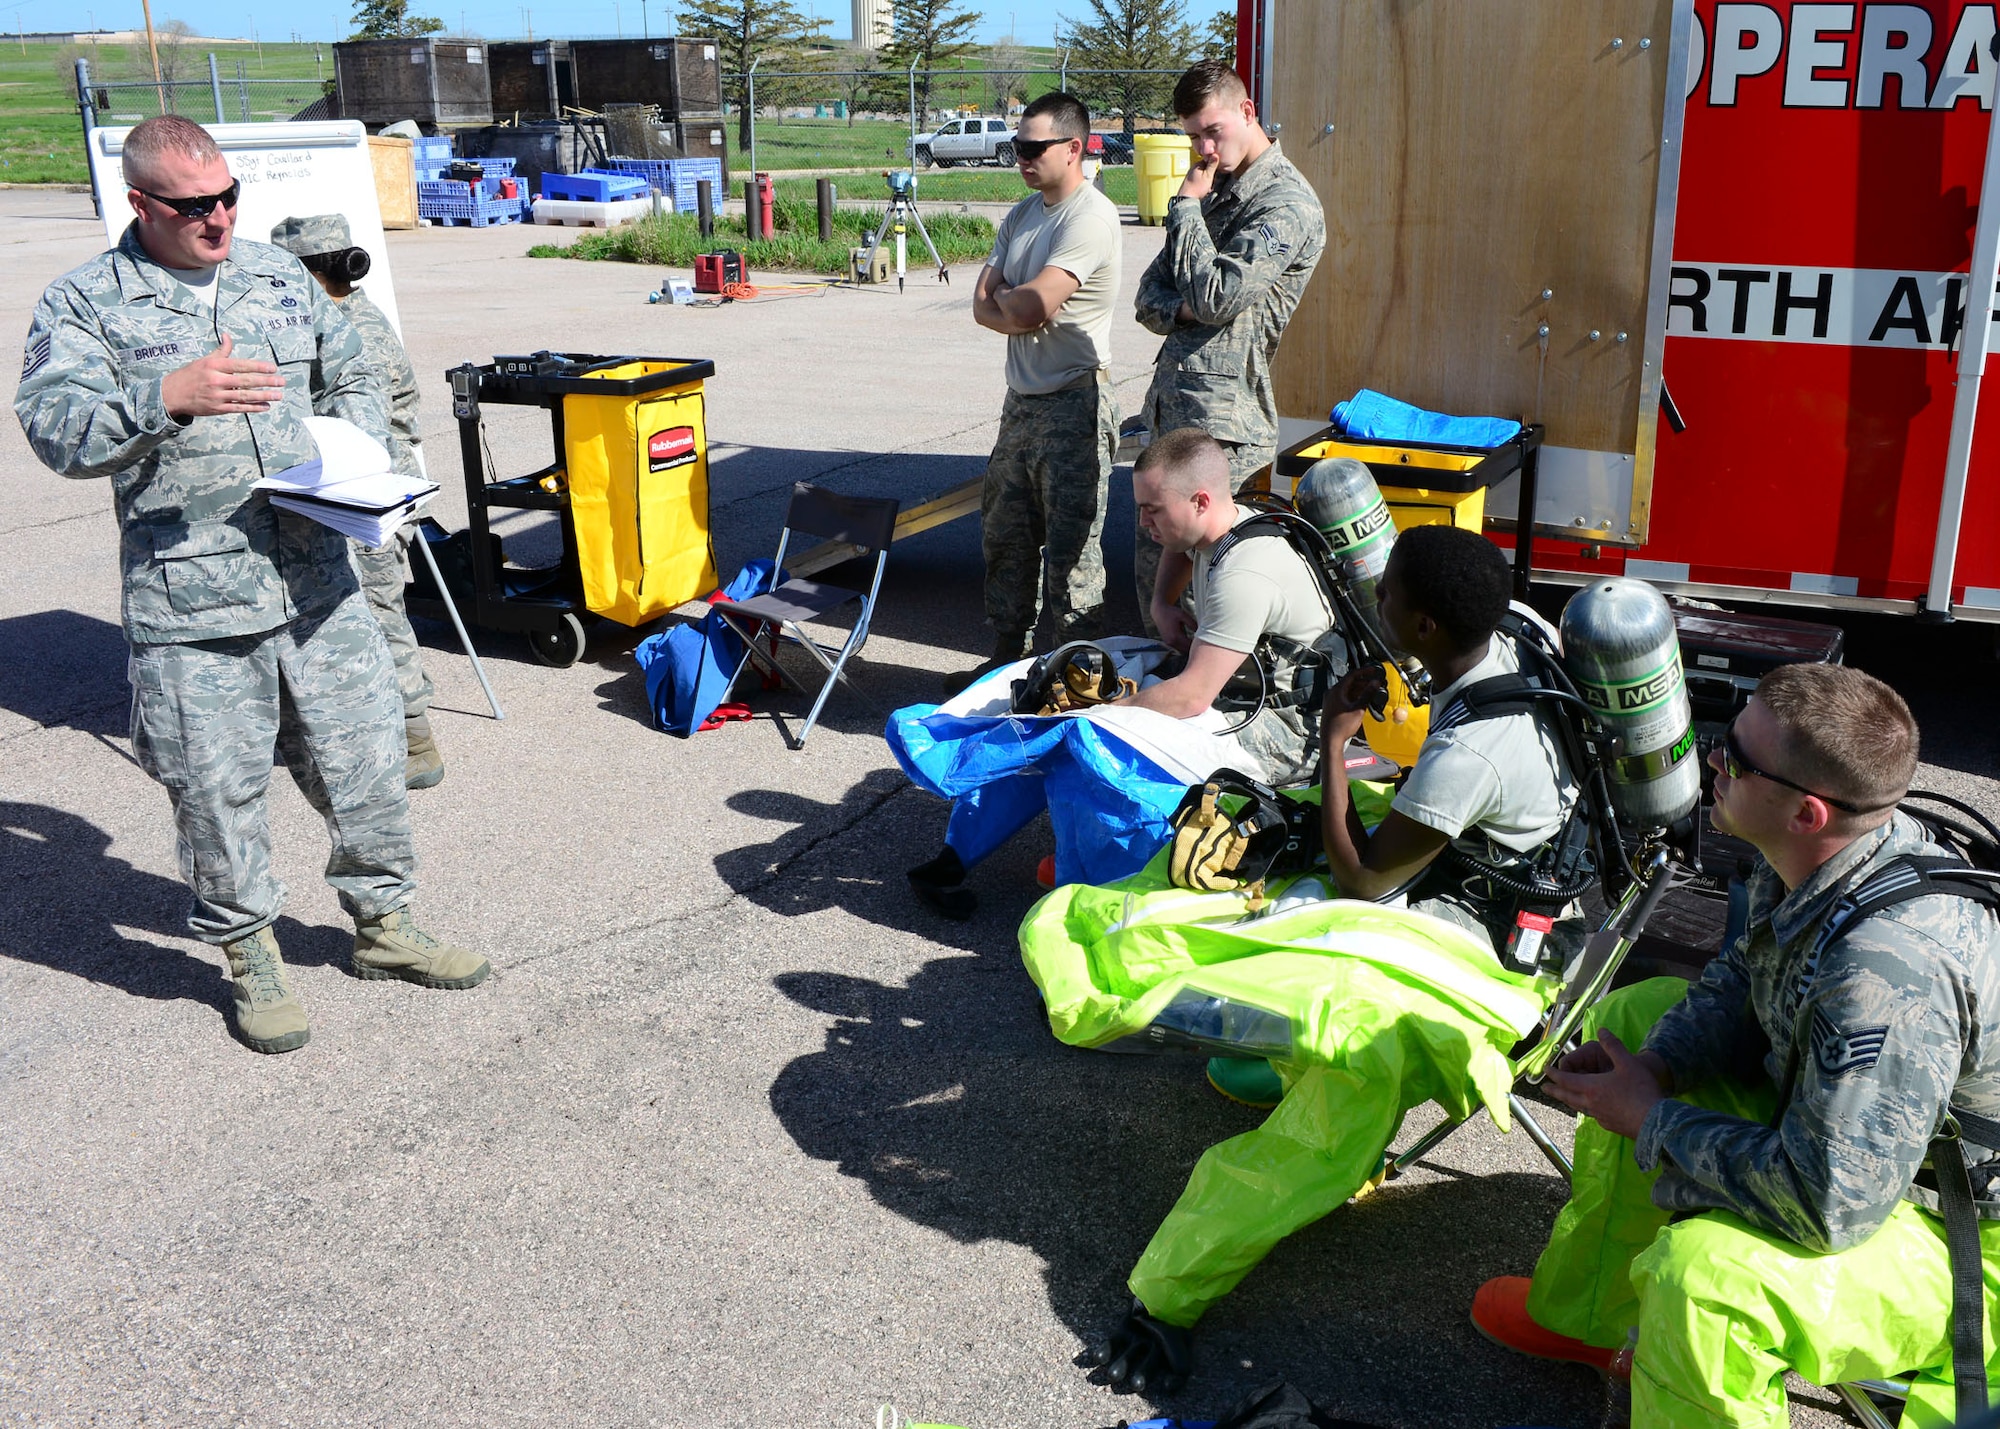 Tech. Sgt. Timothy Bricker, 28th Civil Engineer Squadron emergency management NCO in charge, briefs Airmen on the situation they are facing during an Integrated Base Emergency Response Capabilities Training at Ellsworth Air Force Base, S.D., May 22, 2014.  Two teams of Airmen participated in simulated radiation scenarios requiring them to test air levels for radiation and establish safety zones. (U.S. Air Force photo by Senior Airman Anania Tekurio/Released)  